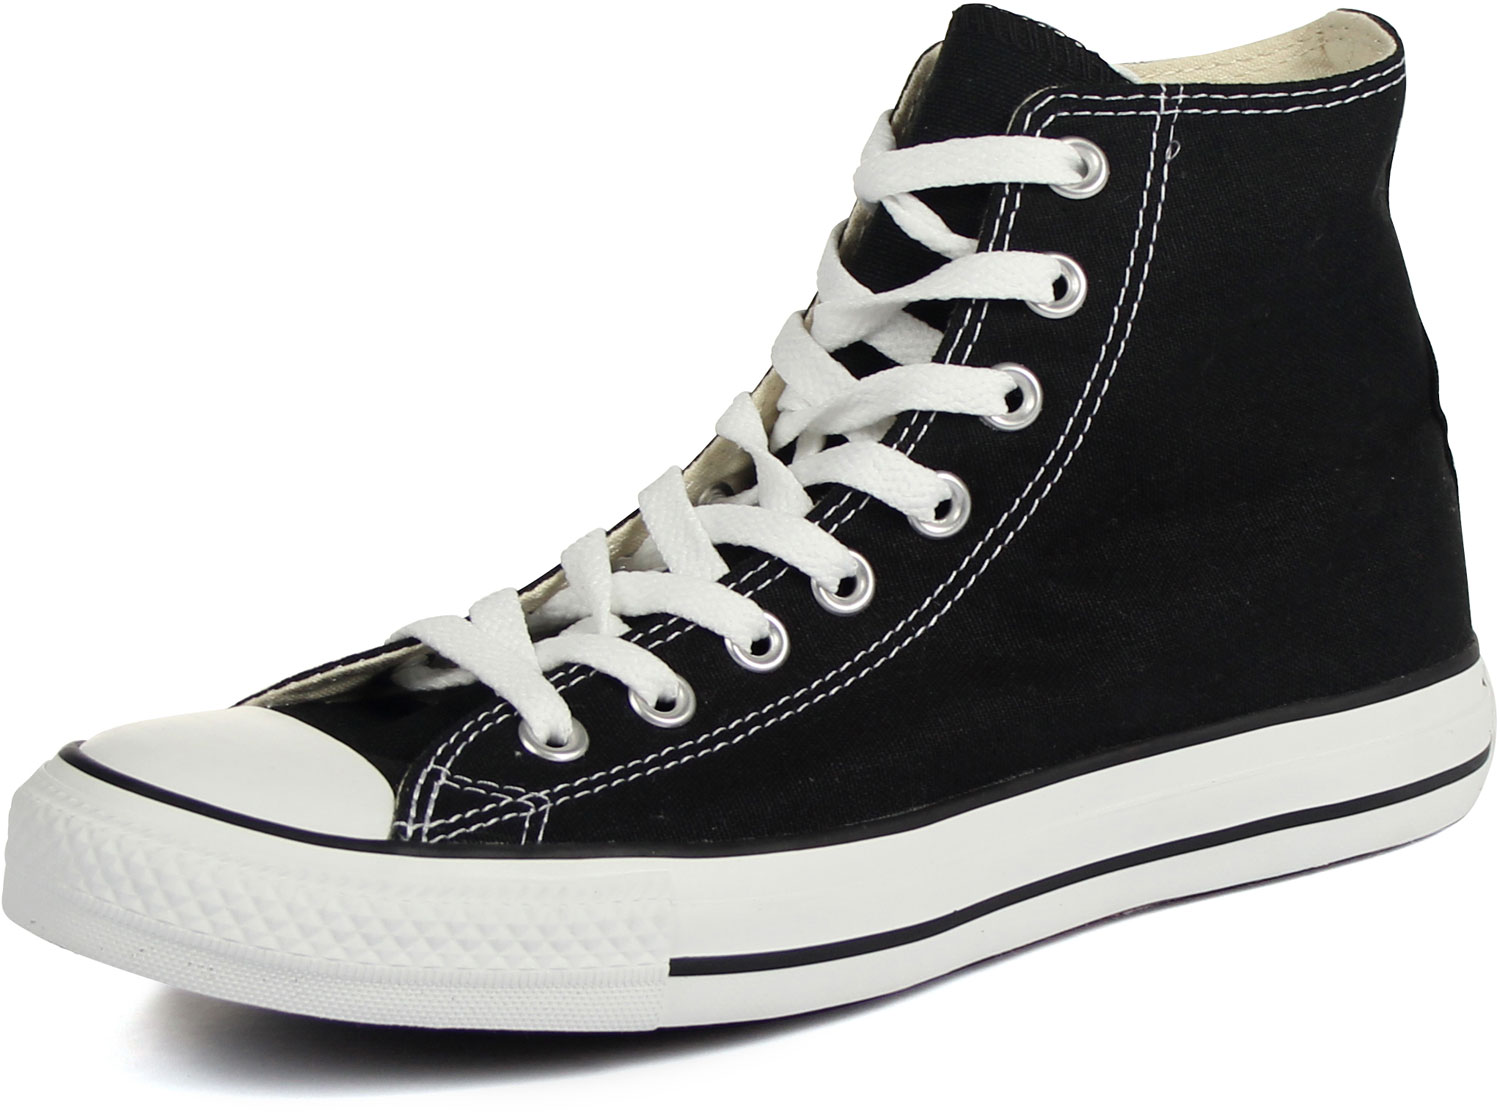 Converse Chuck Taylor All Star Shoes 